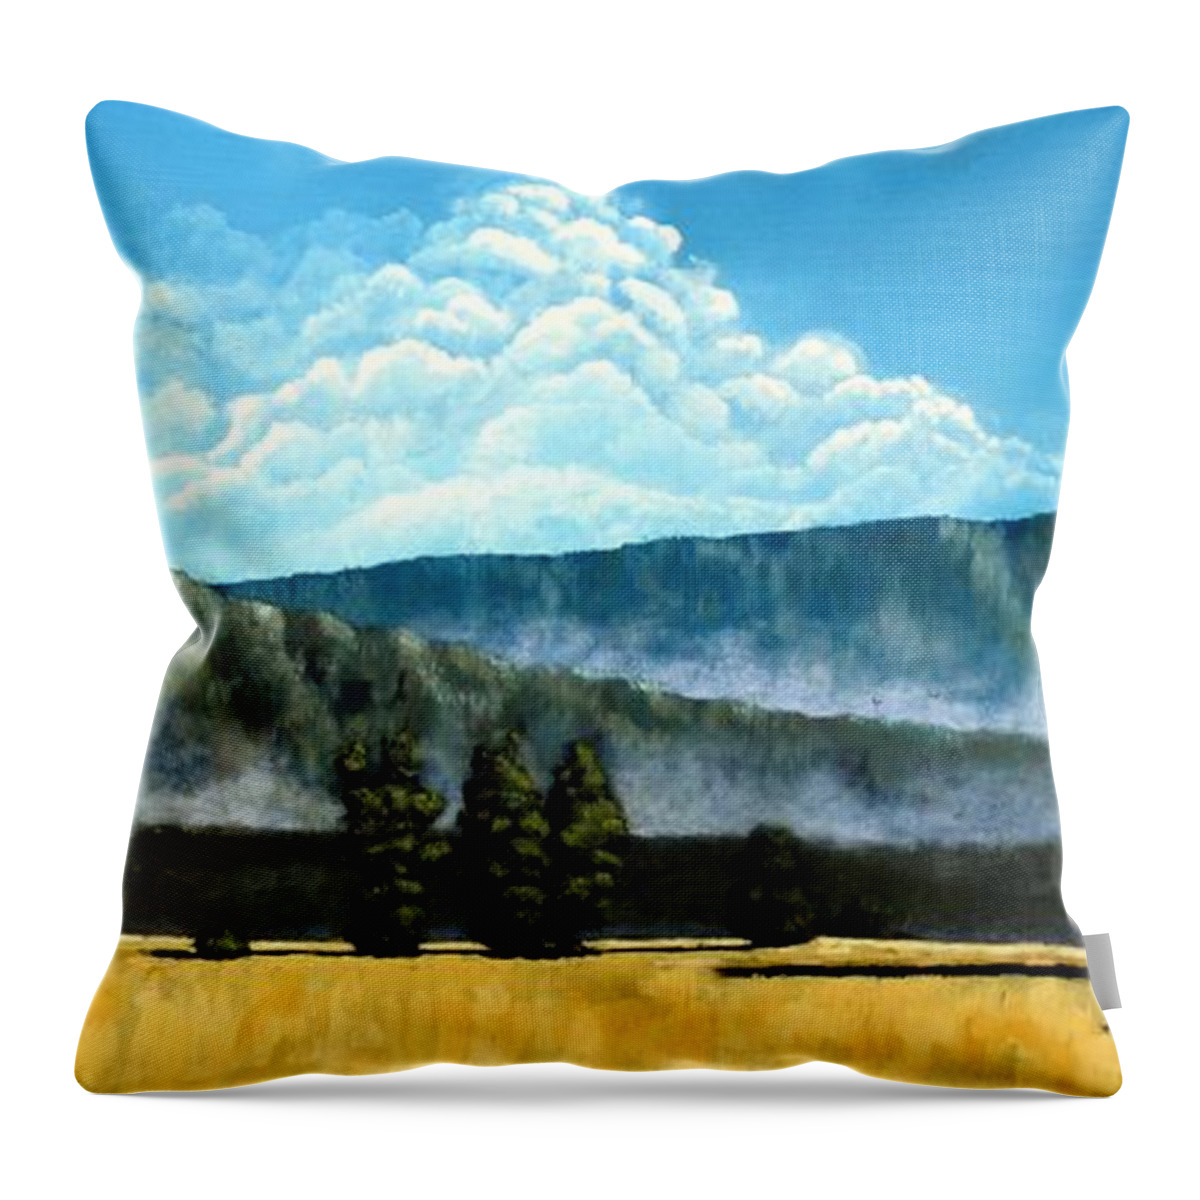 Landscape Throw Pillow featuring the painting Green Mist by Michael Dillon